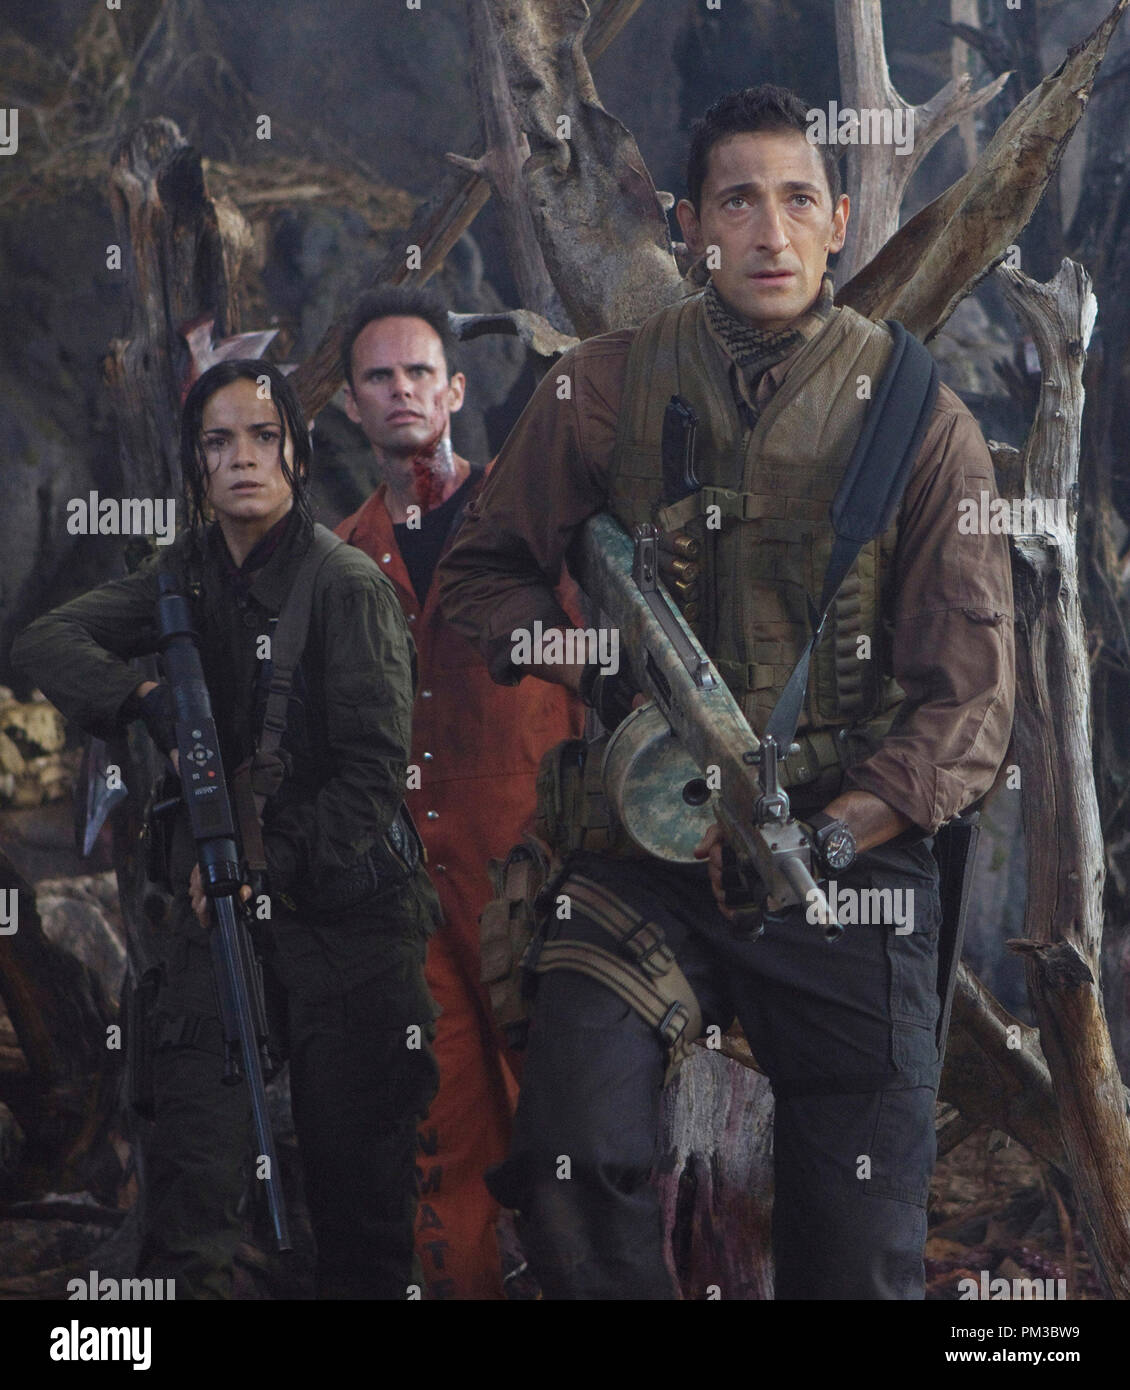 (left-right) Isabelle (Alice Braga), Stans (Walton Goggins) and Royce (Adrien Brody) face a fearsome enemy. Stock Photo